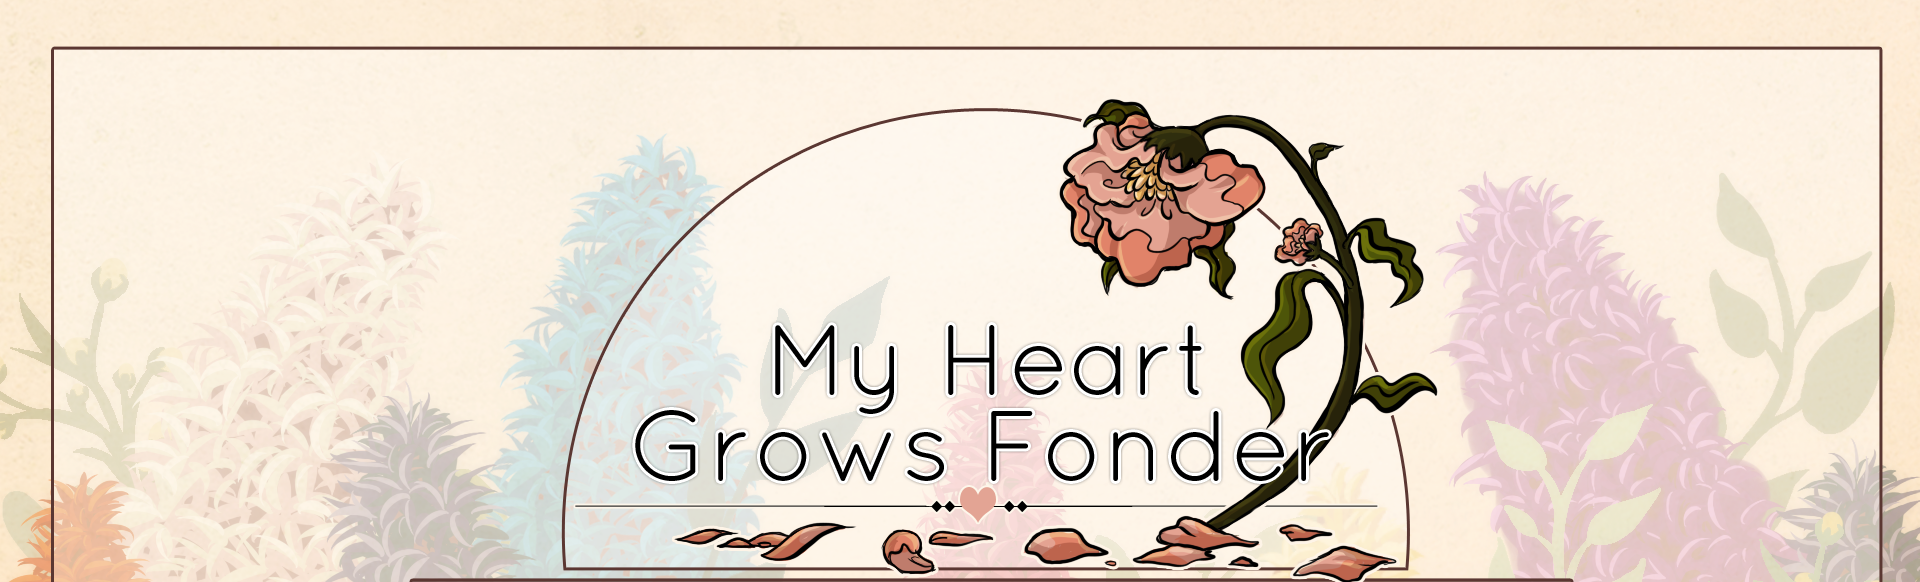 My Heart Grows Fonder poster